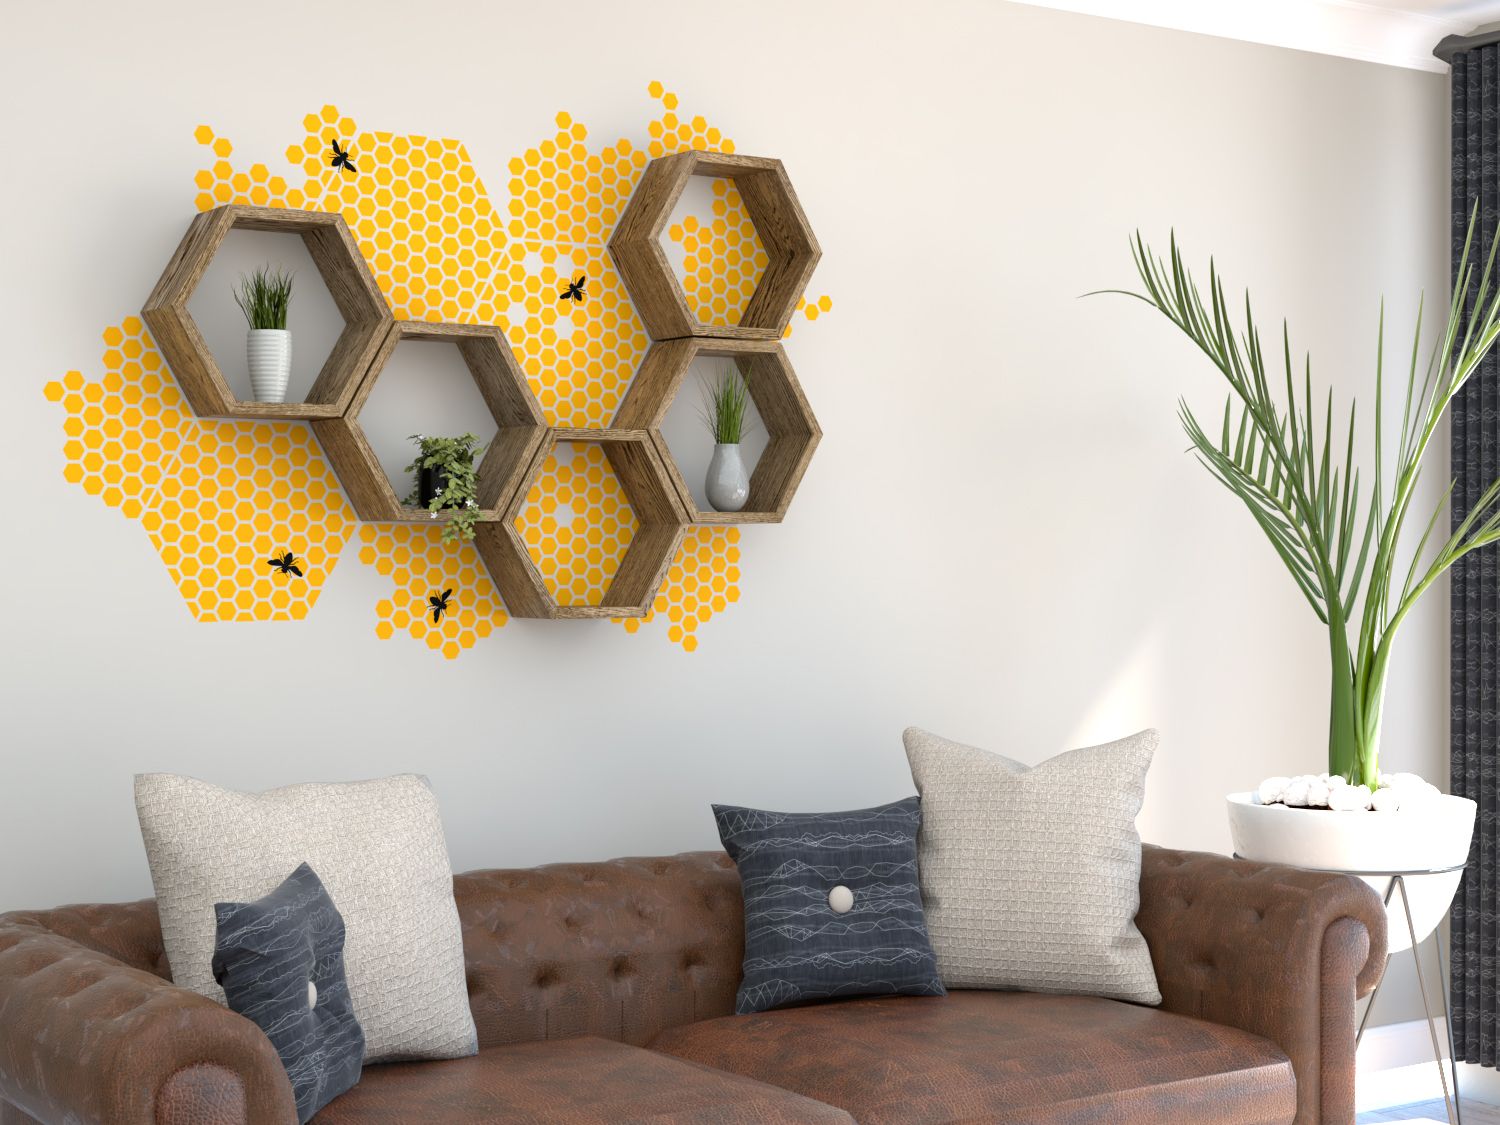 Vinyl Wall Decal | Wall Stickers | Honeycomb Decal | Wall Pertaining To Current Stripes Wall Art (View 11 of 20)